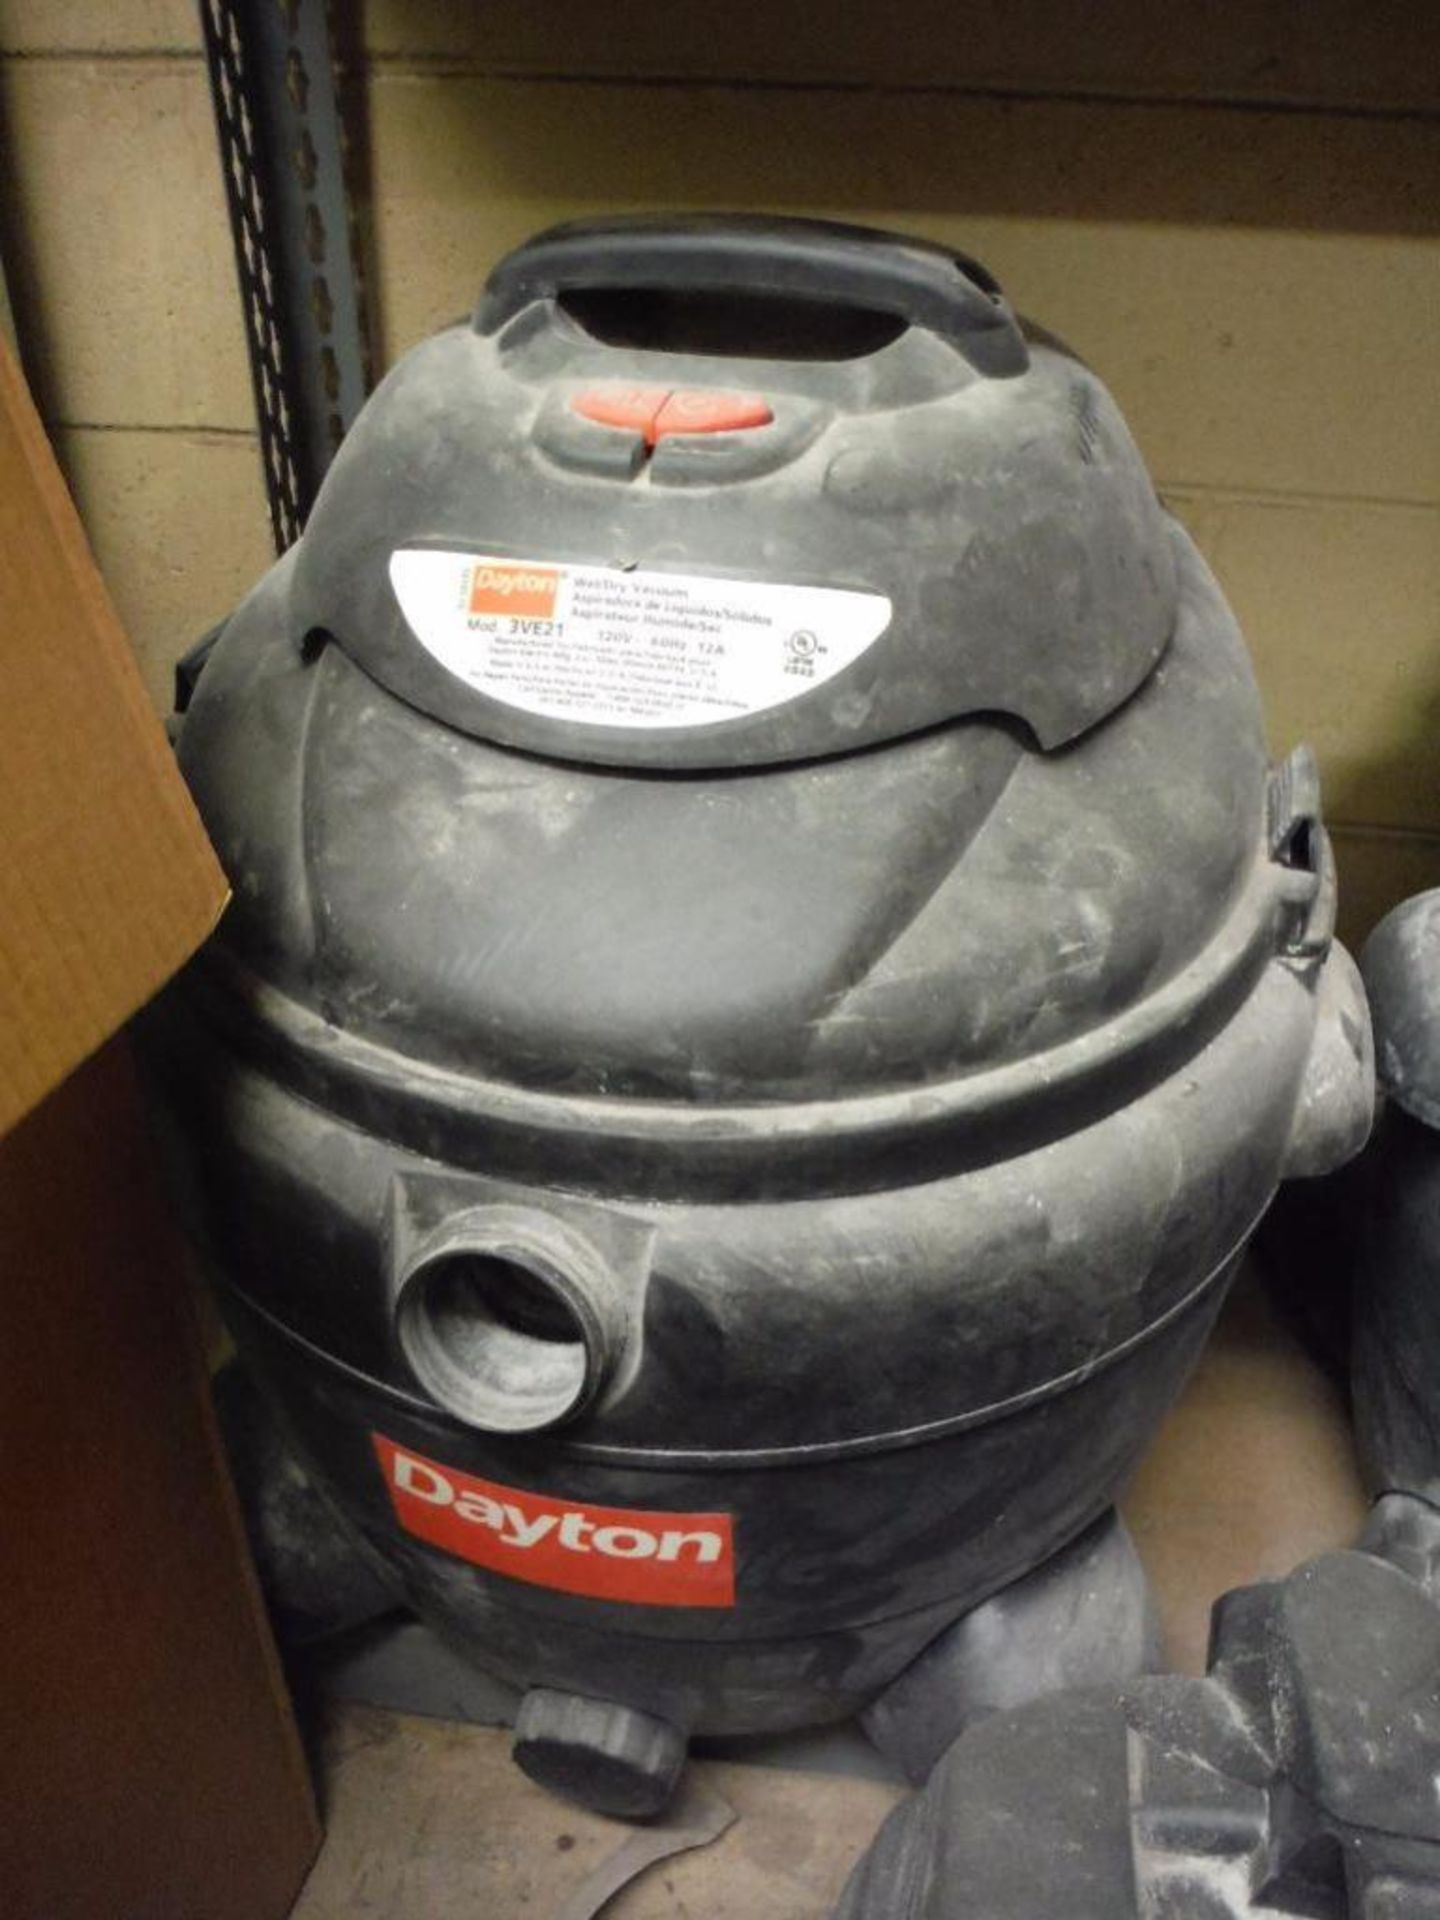 Contents of 1 sections of shelving, new in box Dayton shop vac, multiple used shop vacs ** Rigging - Image 7 of 12